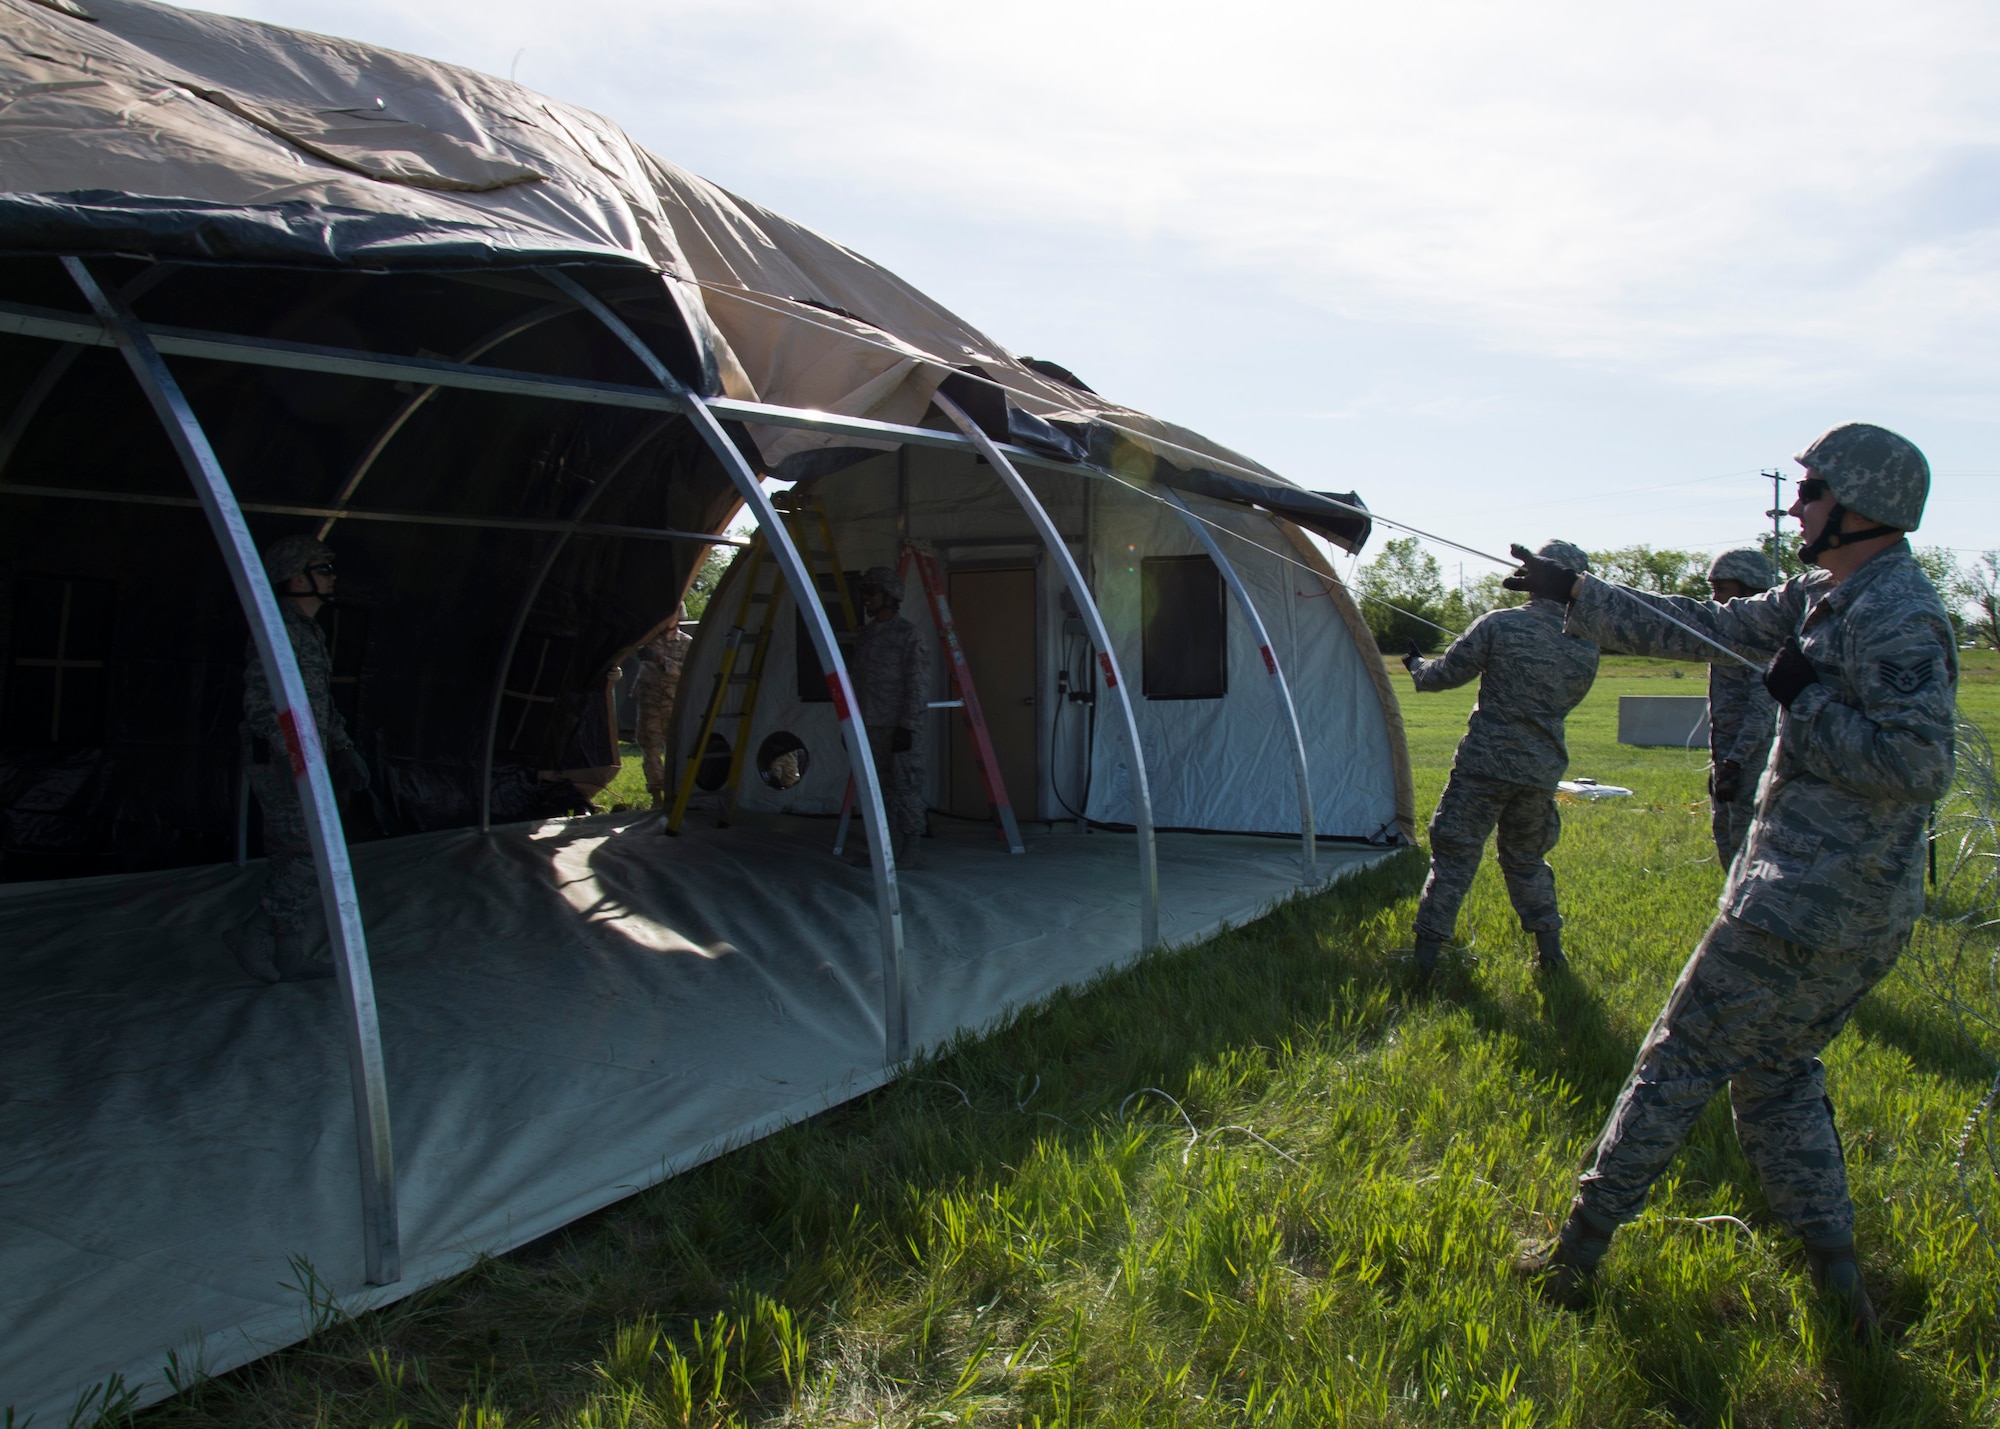 Airmen from the 5th Civil Engineer Squadron build a tent at Minot Air Force Base, N.D., June 1, 2017. The 5th CES built two tents during Expeditionary Training Day, an event that prepares Airmen for potential deployment. (U.S. Air Force photo/Airman 1st Class Alyssa M. Akers)